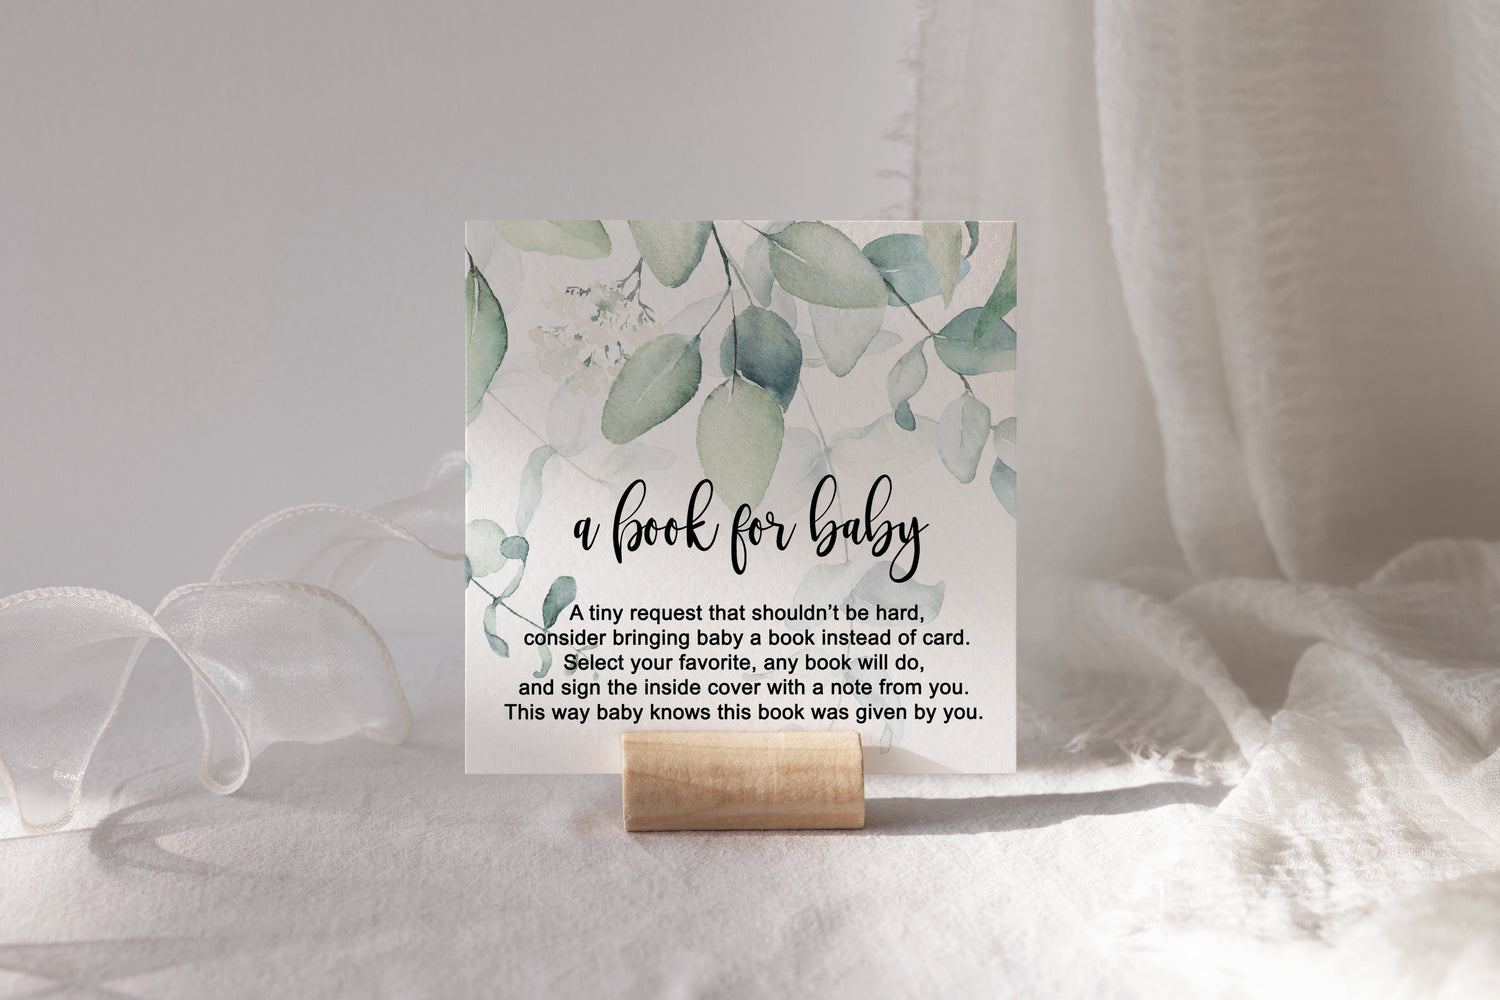  Encourage a lifelong passion for reading by asking attendees to contribute a cherished story in place of a card. Perfect for creating lasting memories and a gift that keeps on giving. 